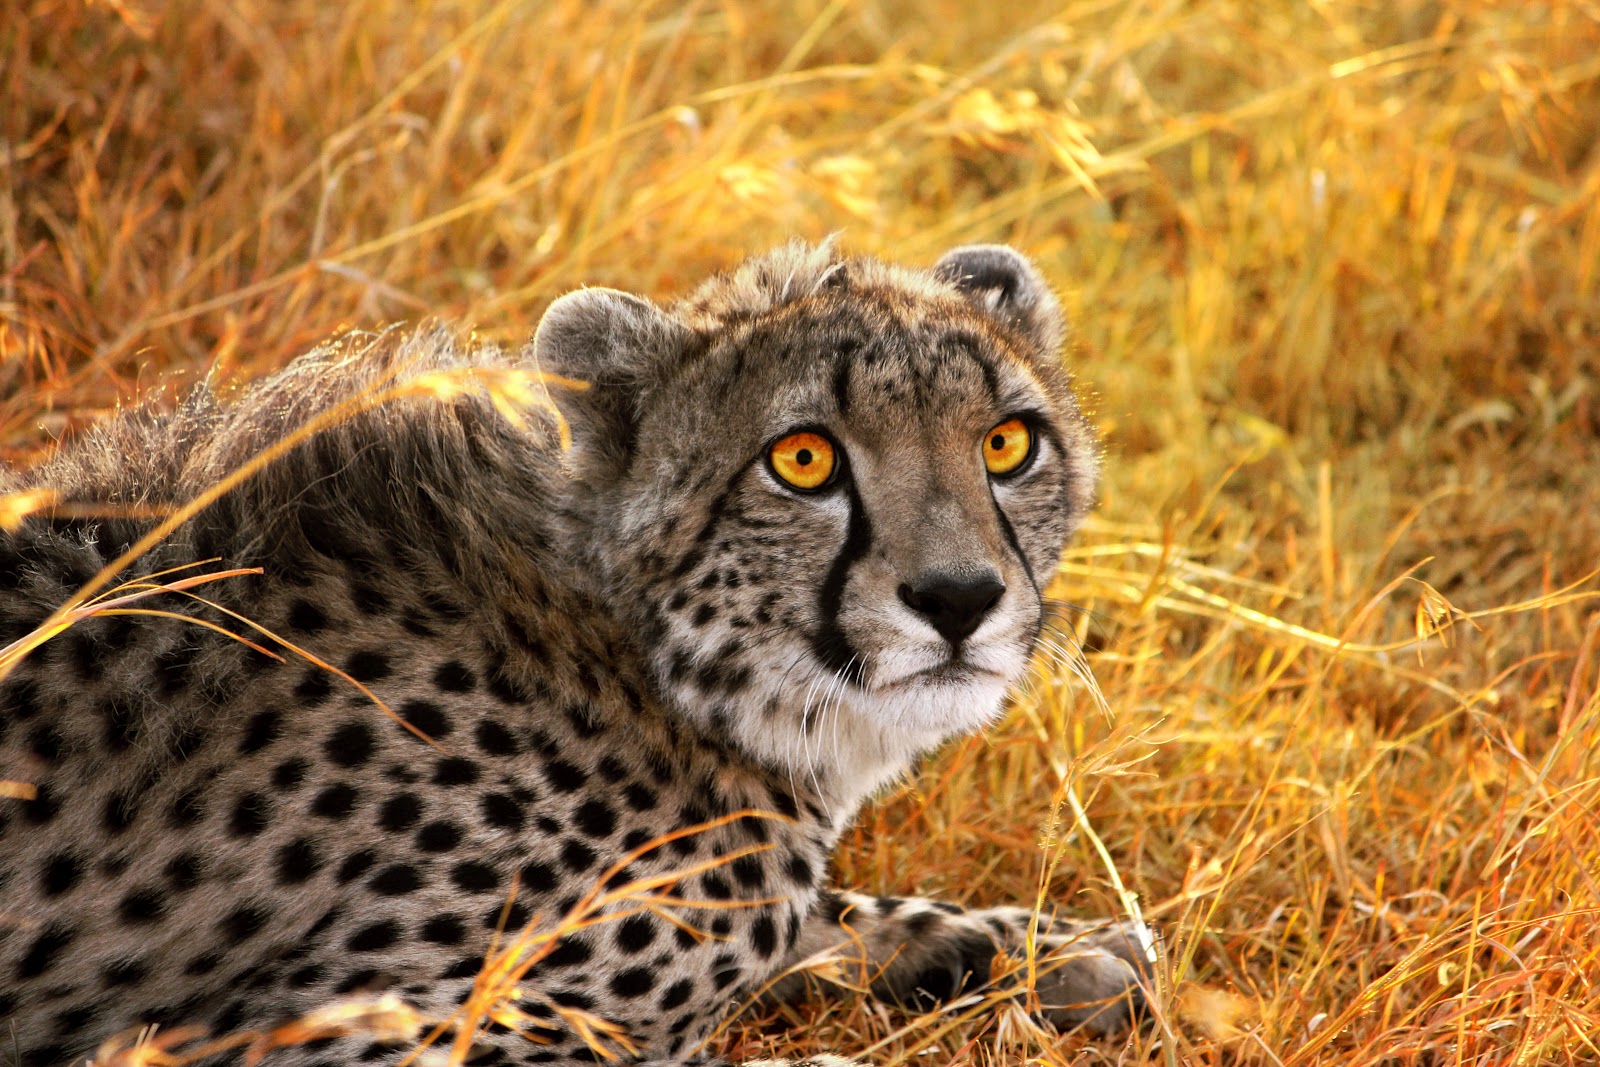 The Spotted S Yellow Cheetah Background